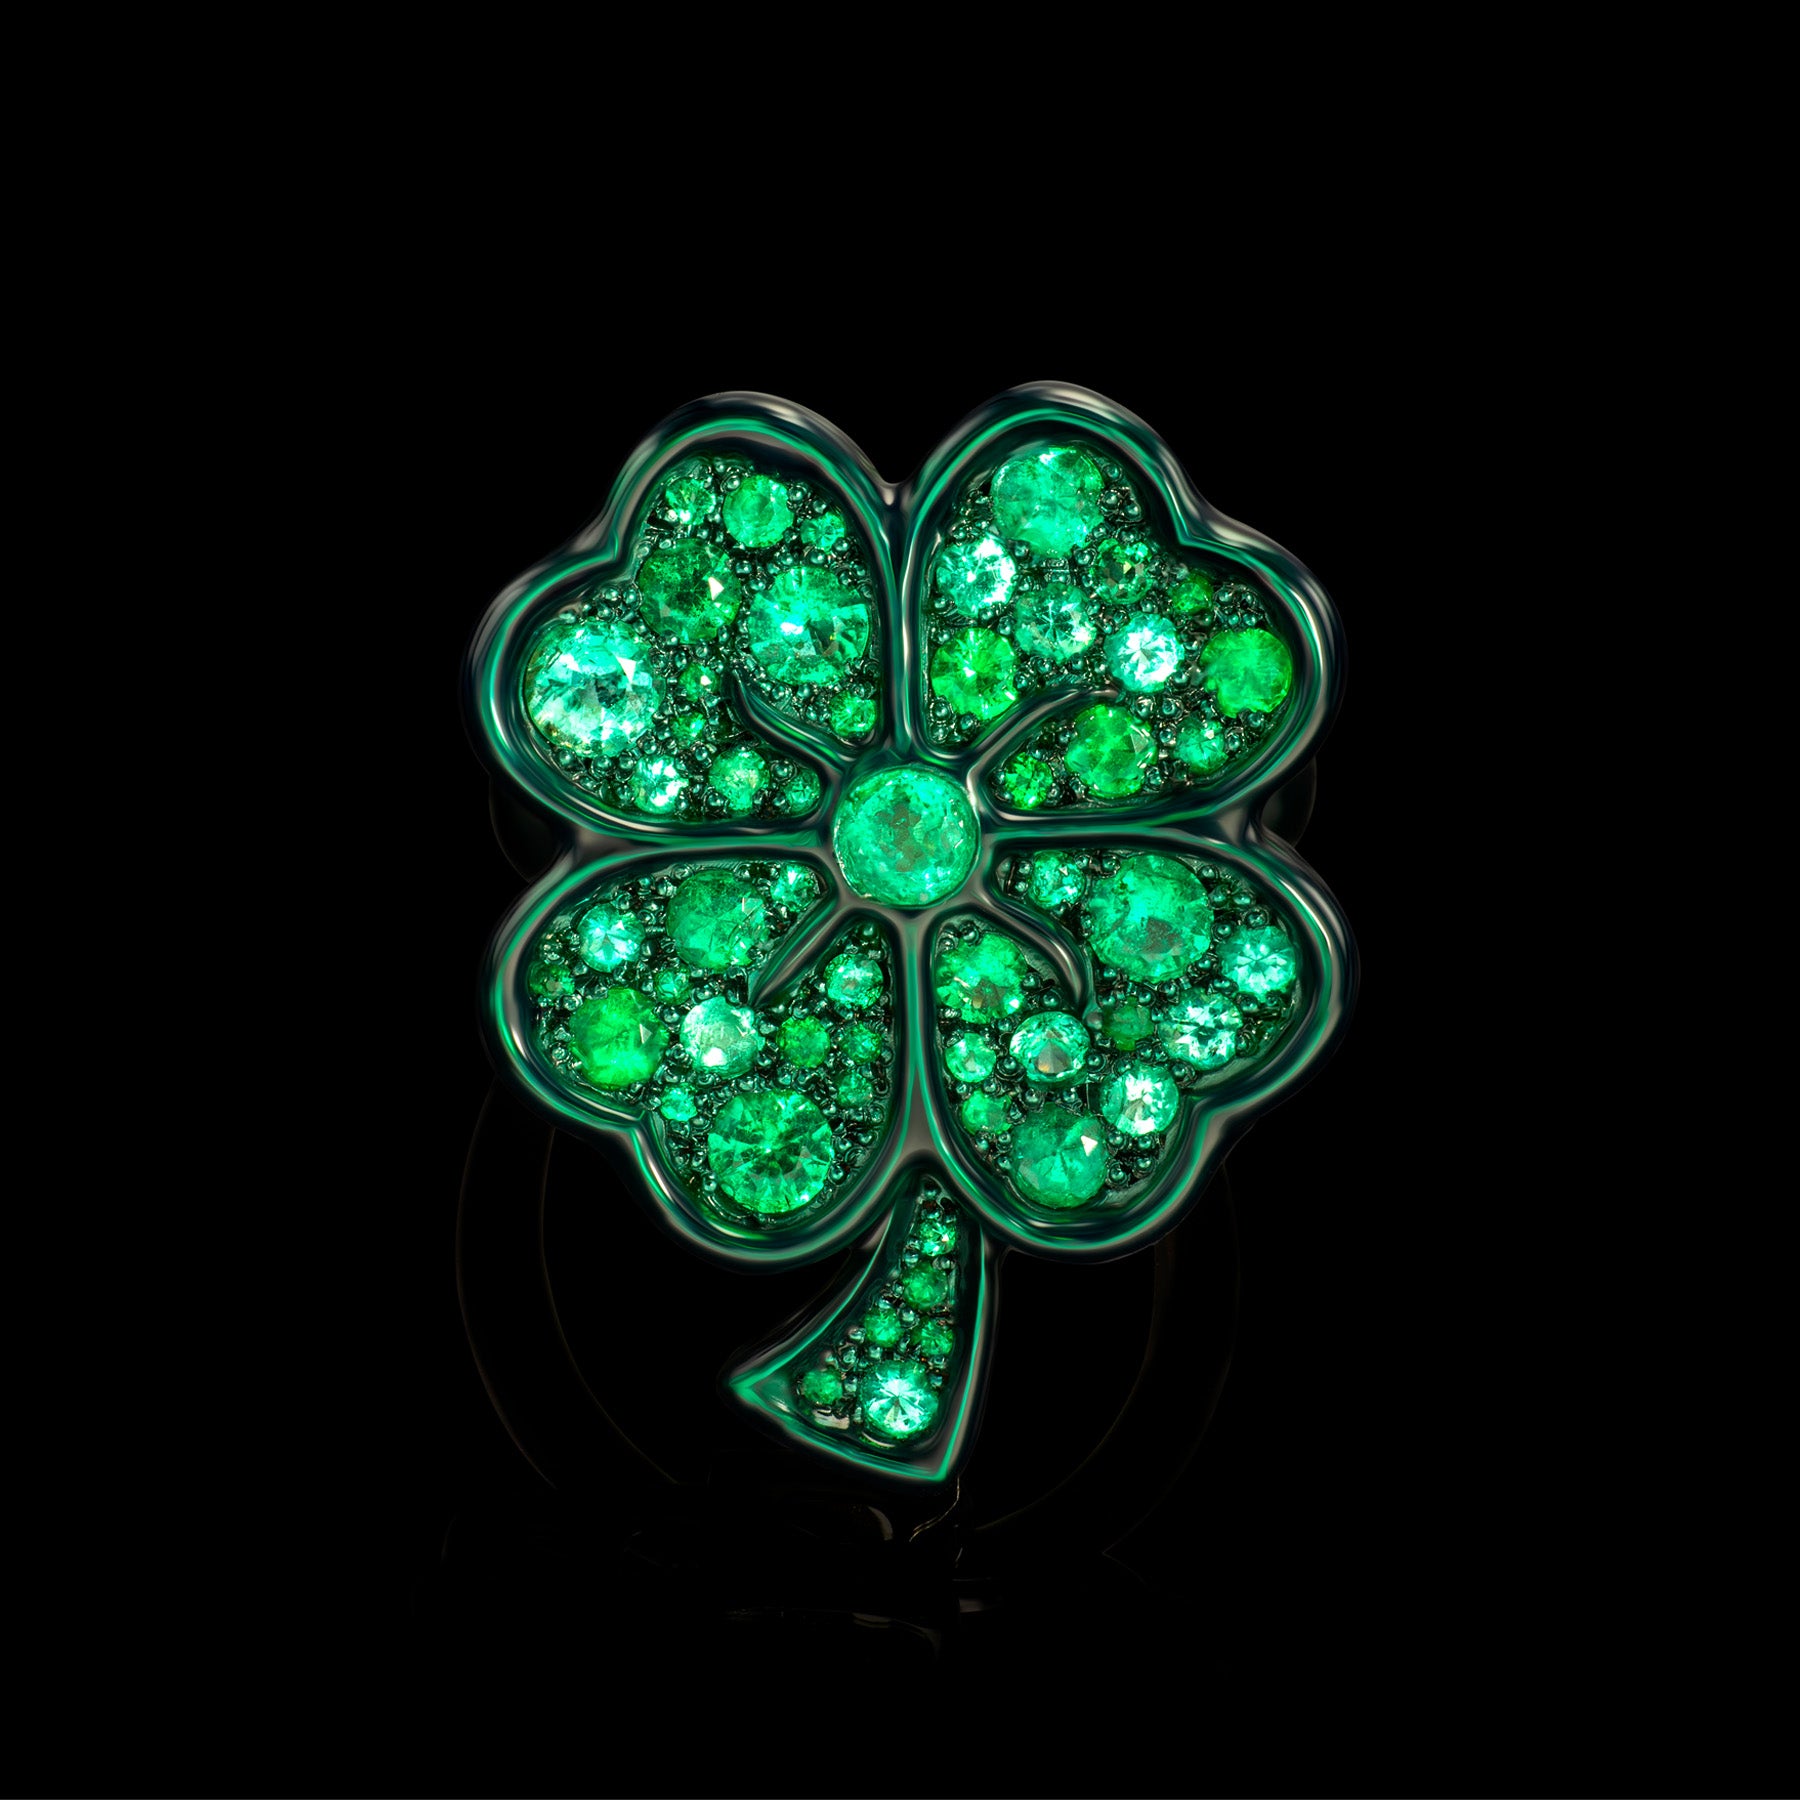 The Lucky ring by designer Solange Azagury-Partridge - Blackened 18k White Gold,, Ceramic and Enamel, Emeralds - front view 1